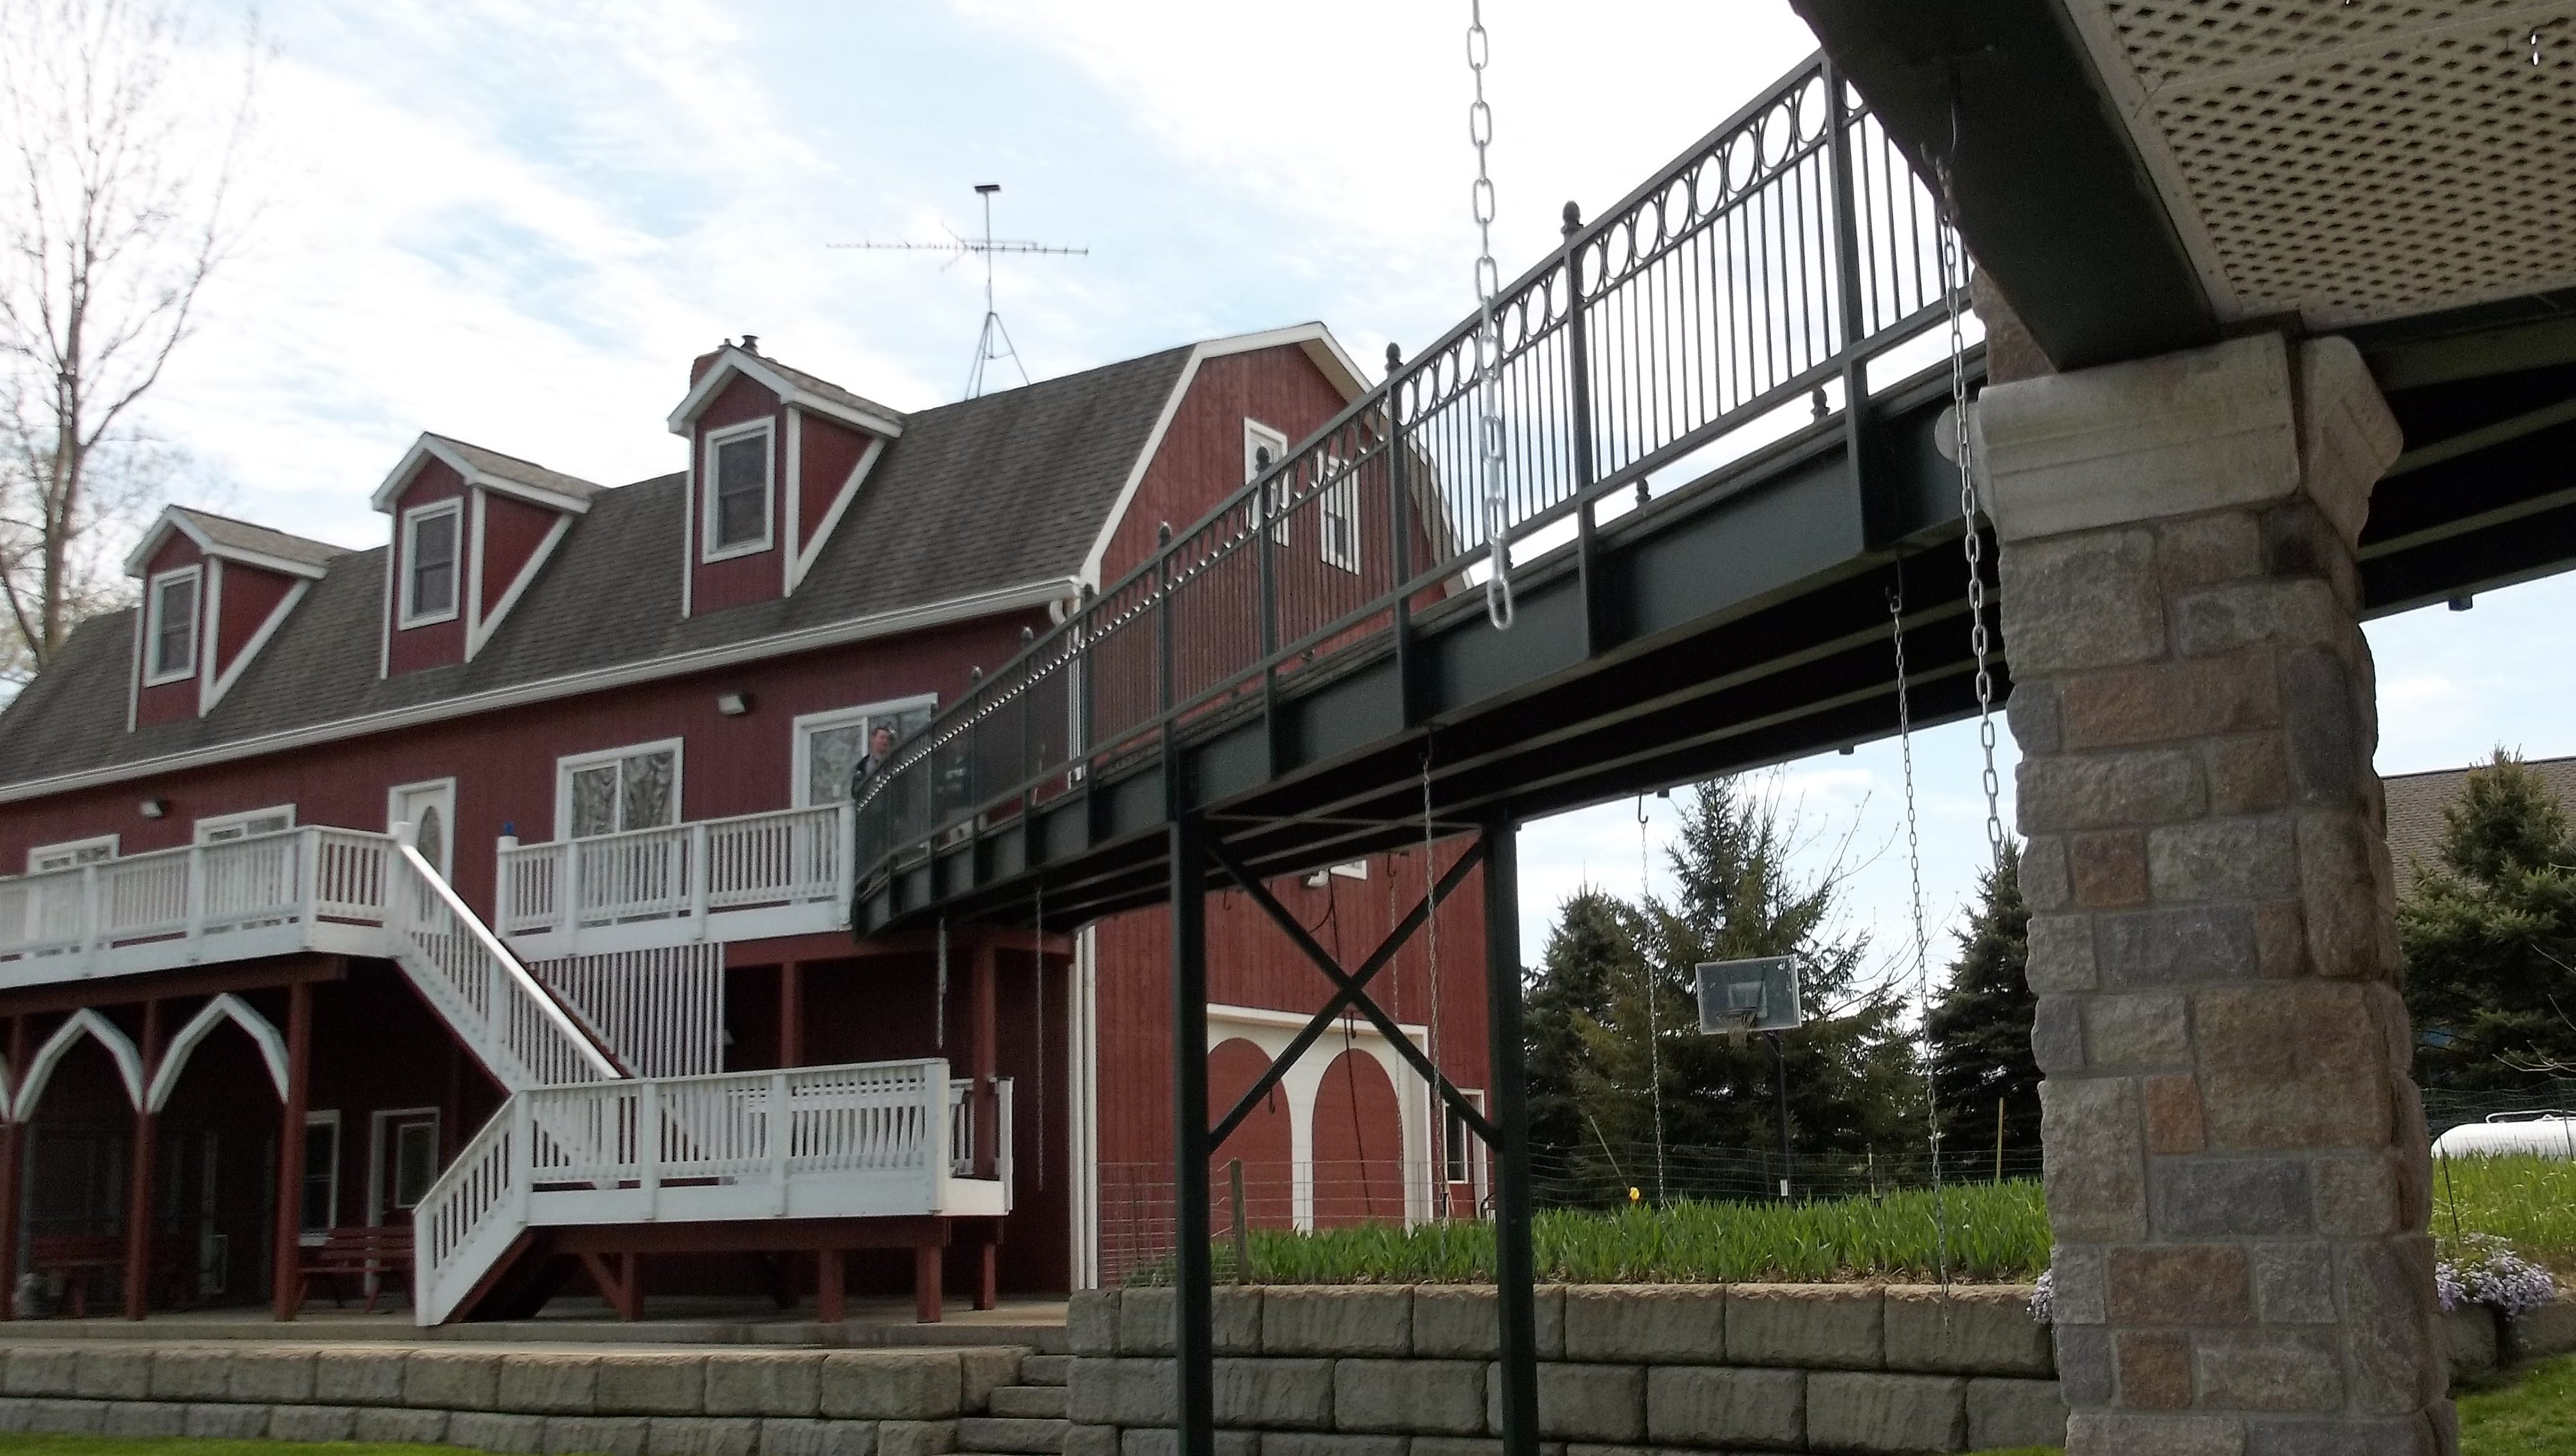 An elevated walkway connects an outbuilding to the main house.